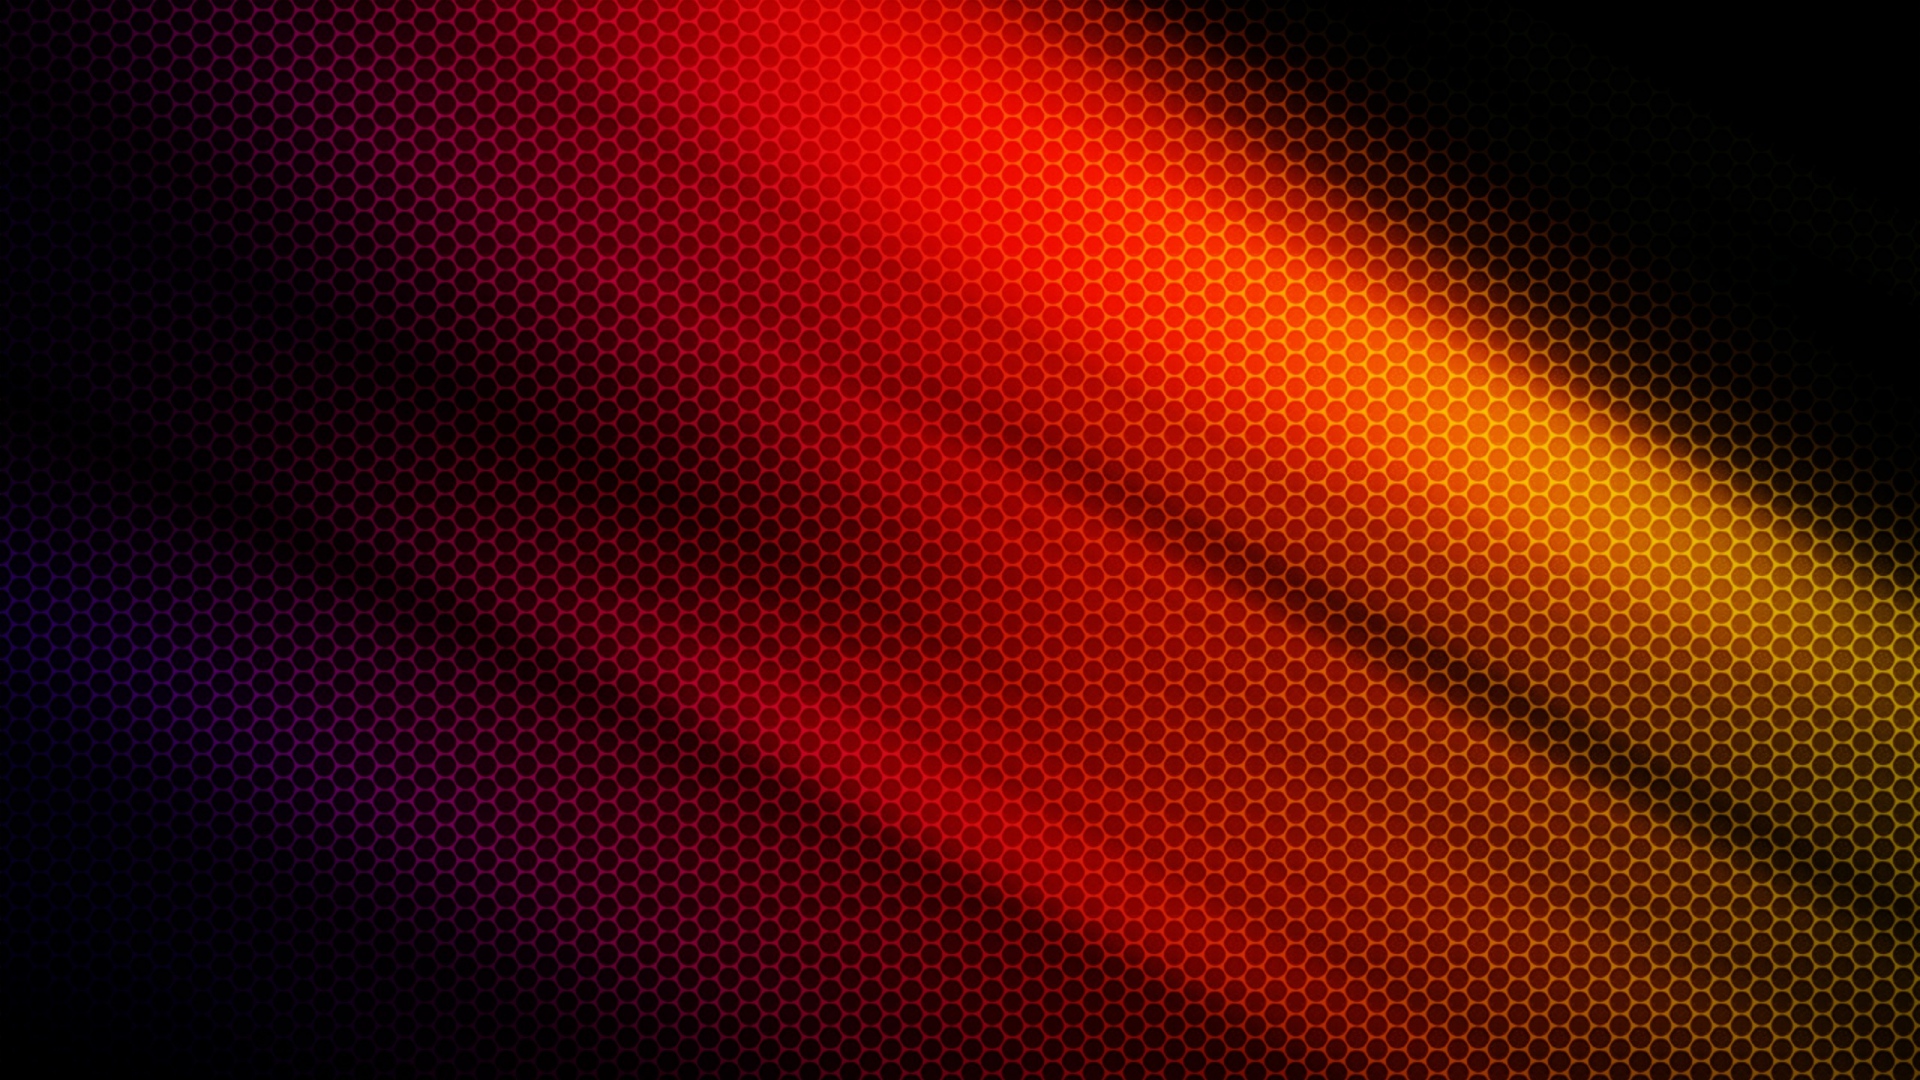 Wallpapers surface red-yellow pattern on the desktop